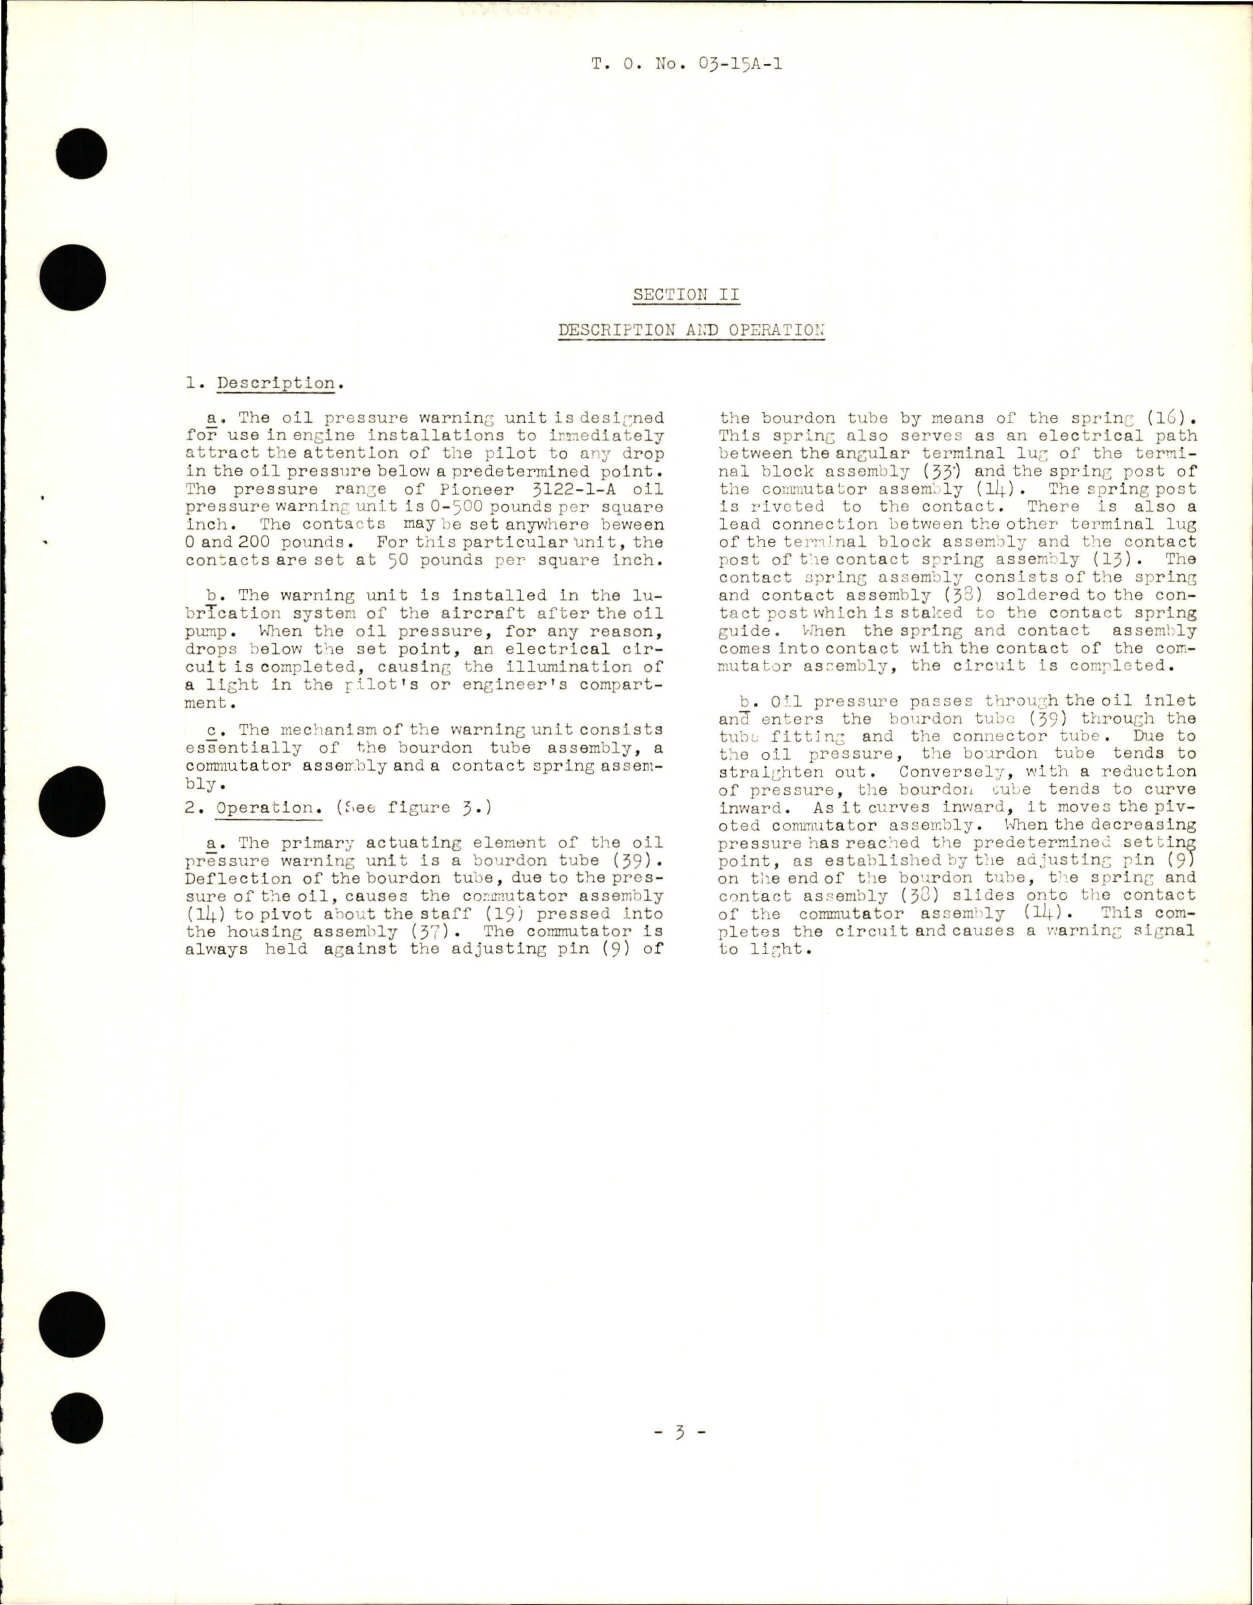 Sample page 5 from AirCorps Library document: Operation, Service and Overhaul Instructions with Parts Catalog for Oil Pressure Warning Unit - Part 3122-1-A